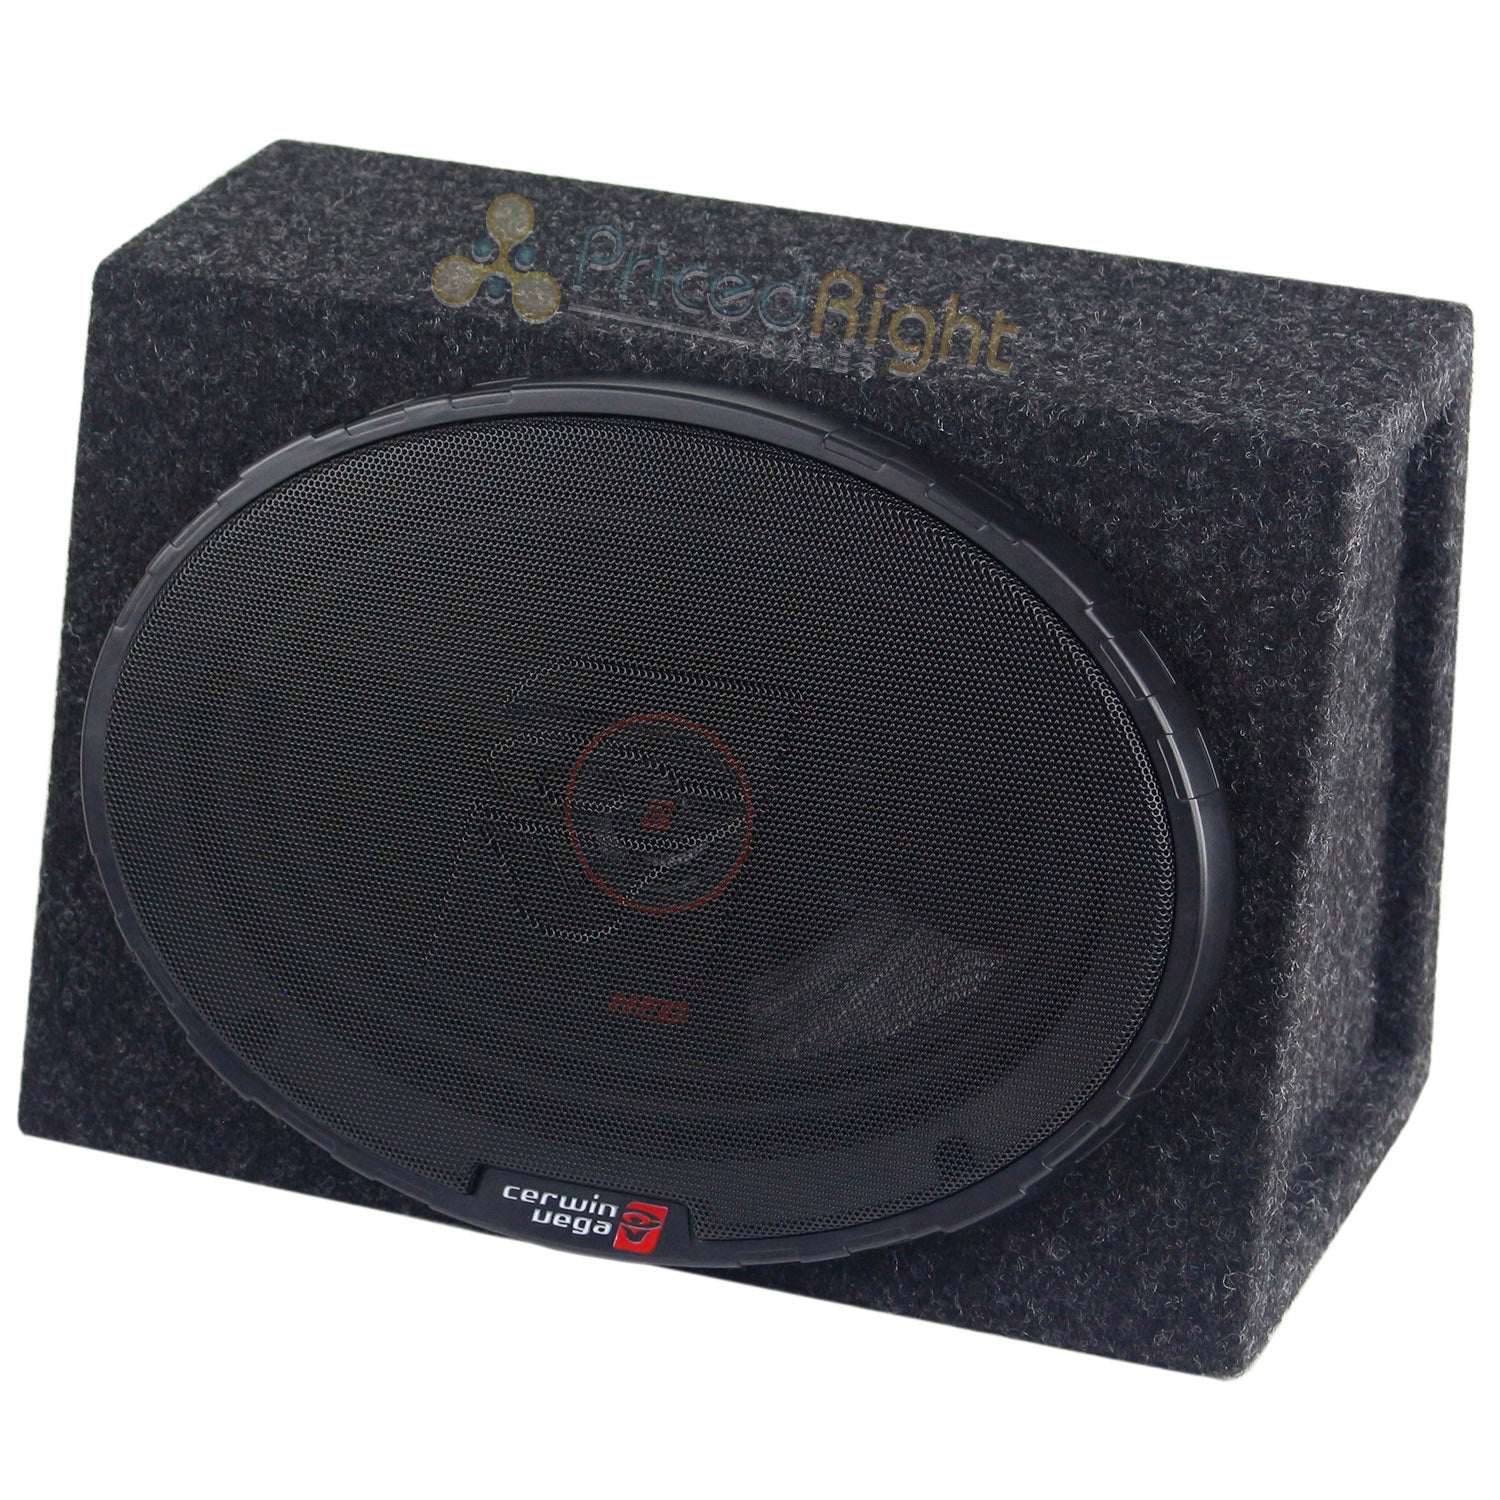 Cerwin Vega H7692 6x9" 2-Way Coaxial Speakers and Angled Enclosure Speaker Boxes